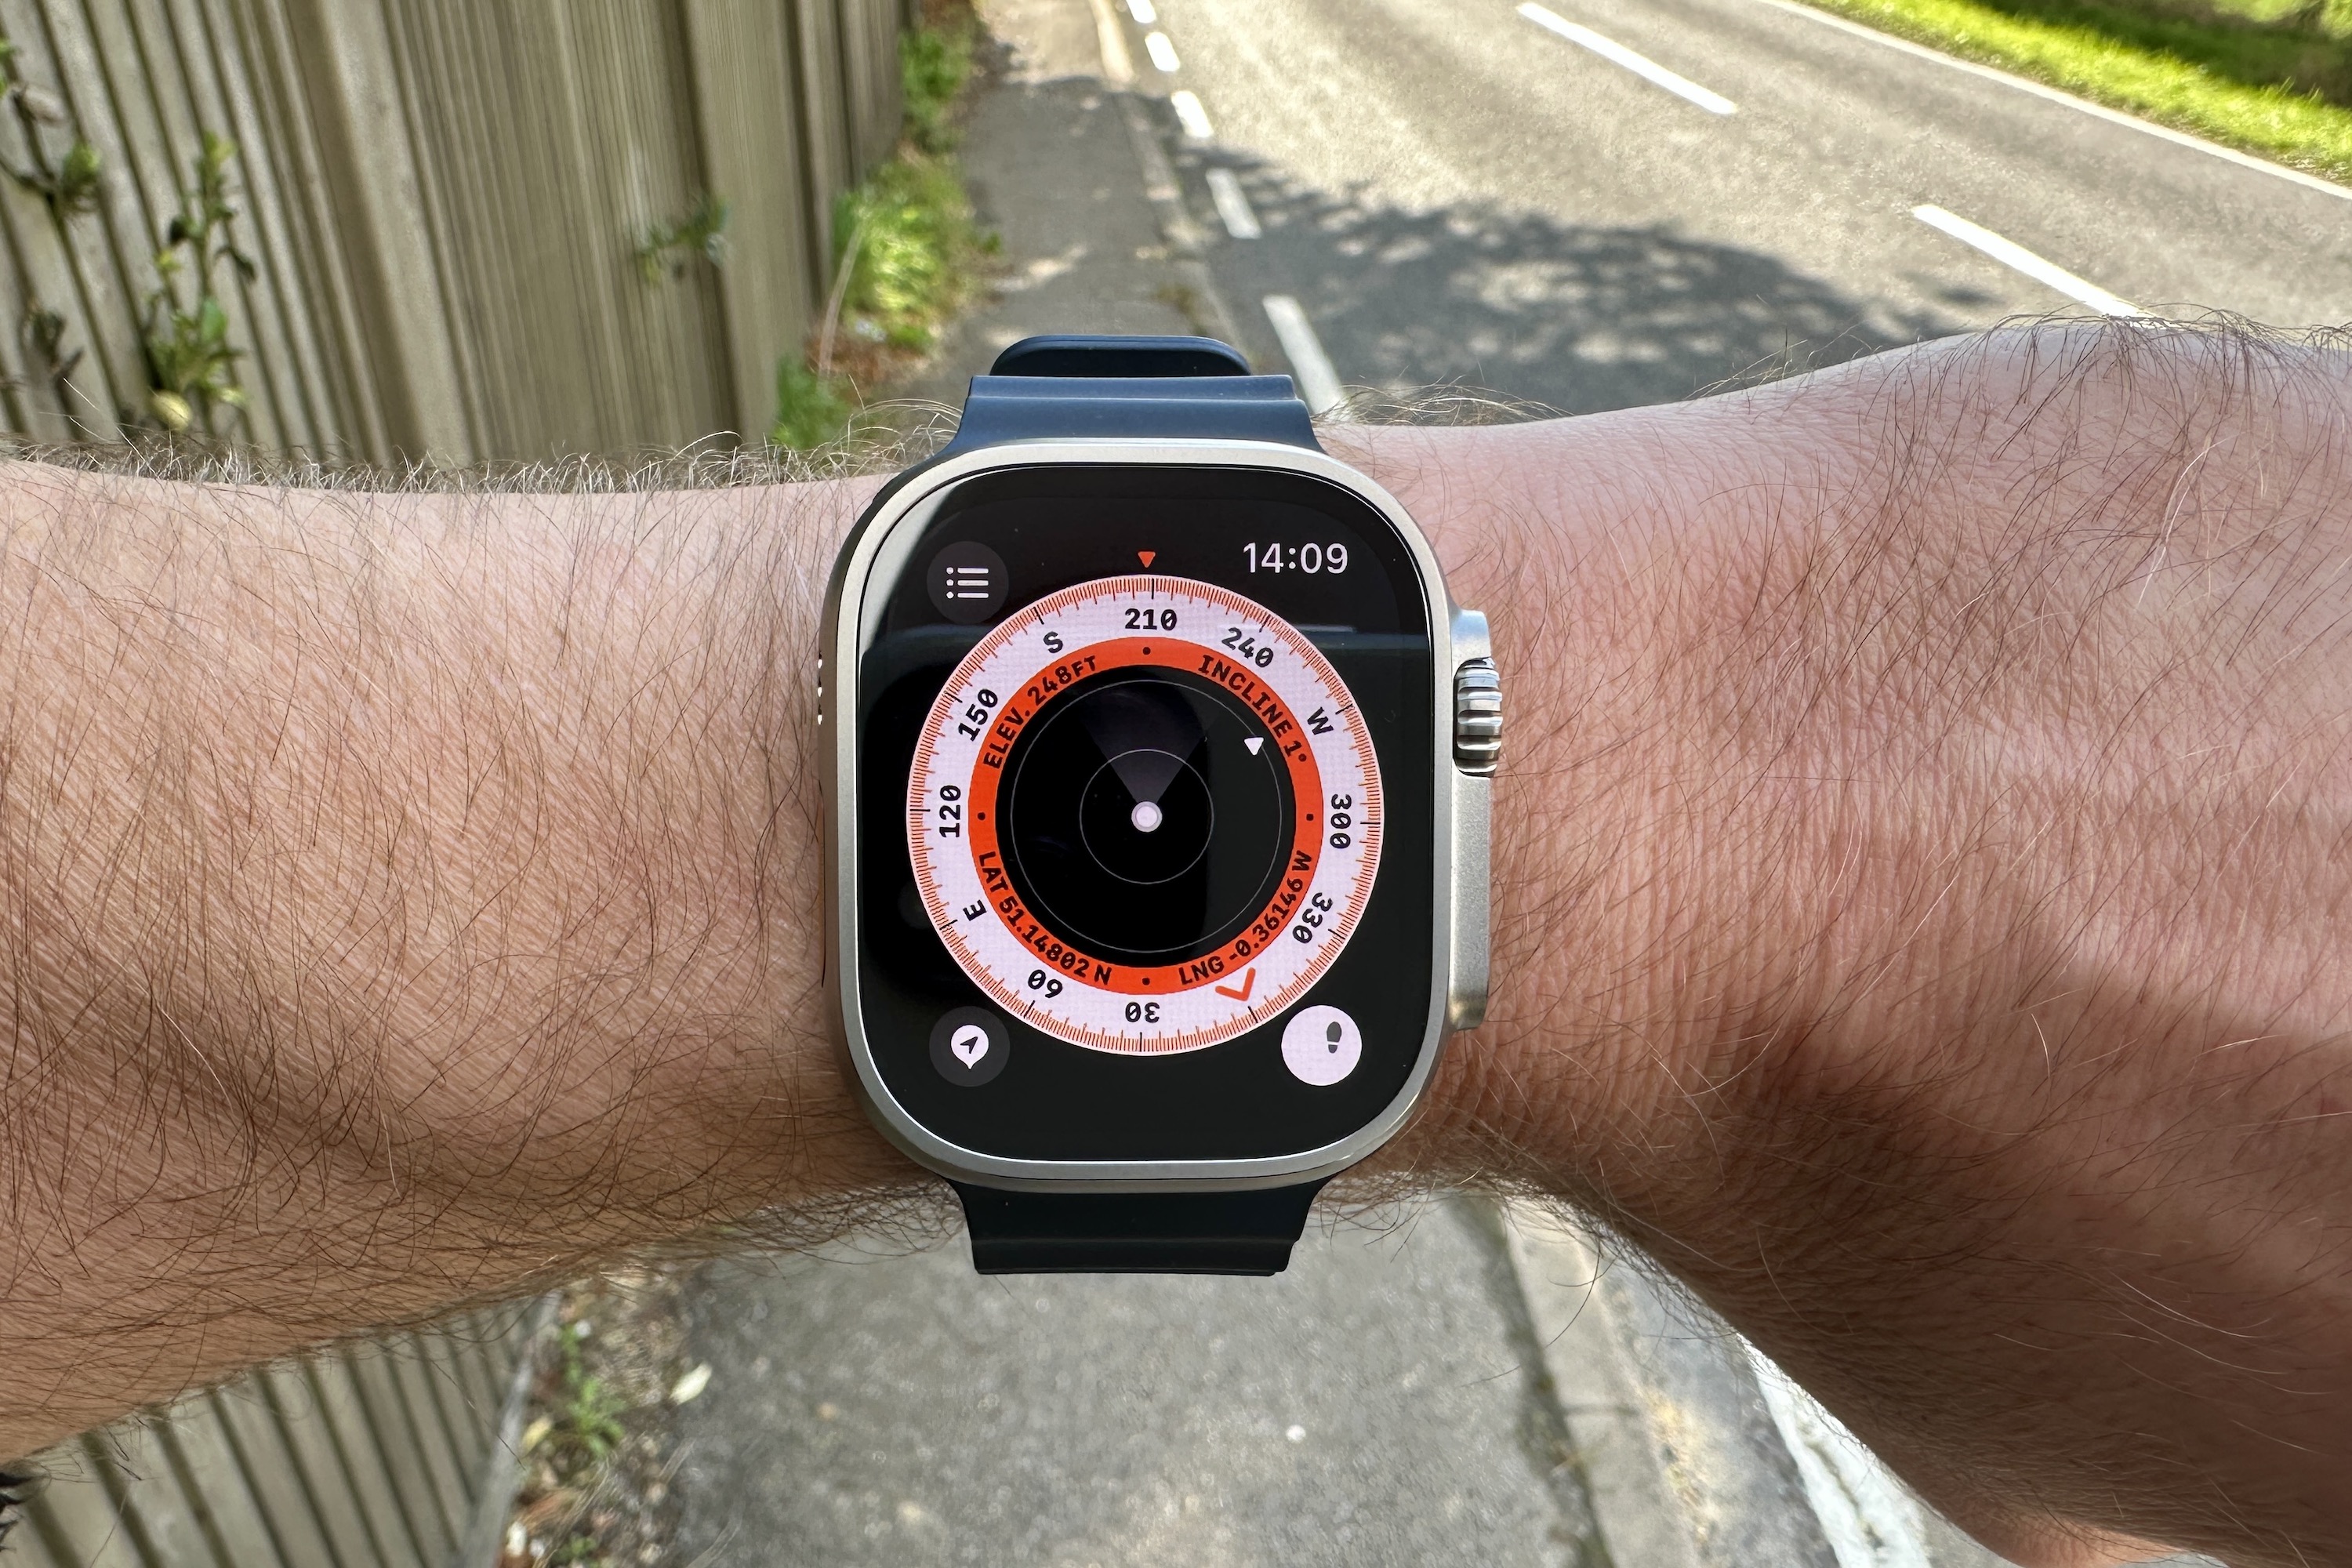 Back Track showing the direction to walk on the Apple Watch Ultra.